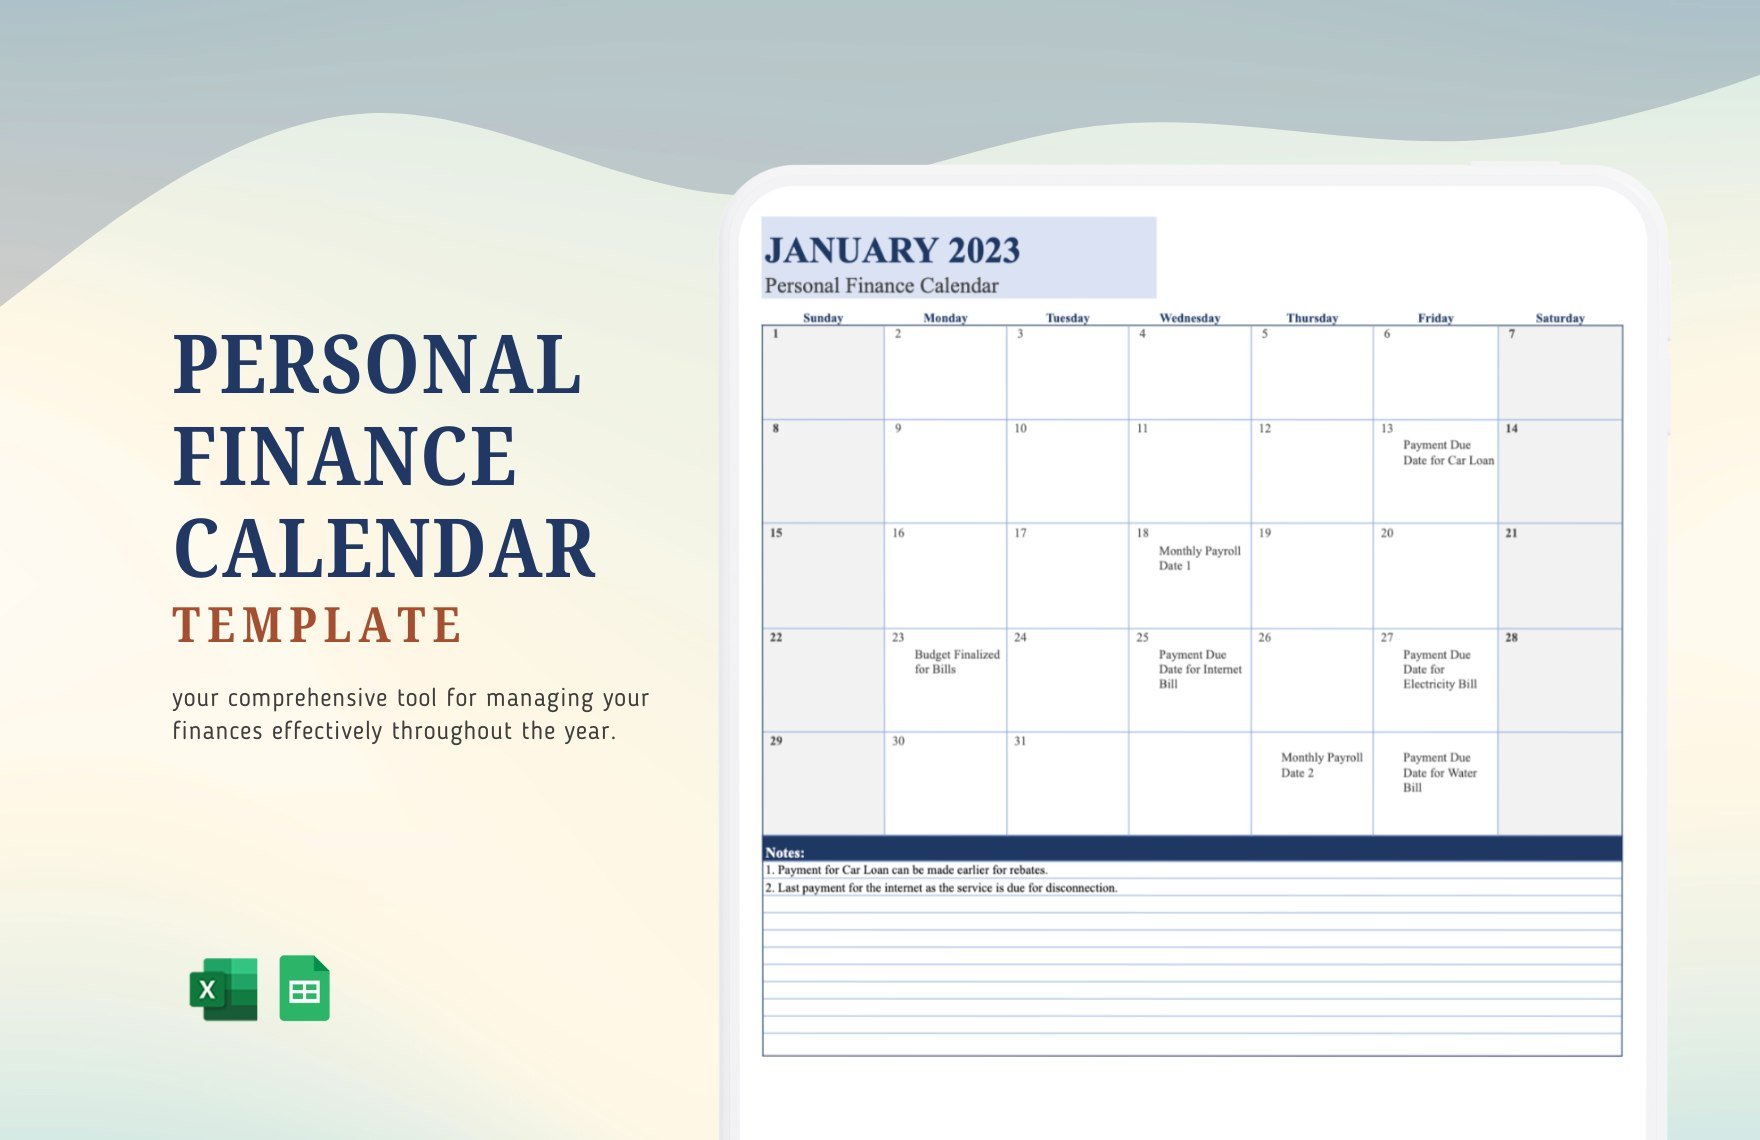 Personal Finance Calendar Template in Excel, Google Sheets